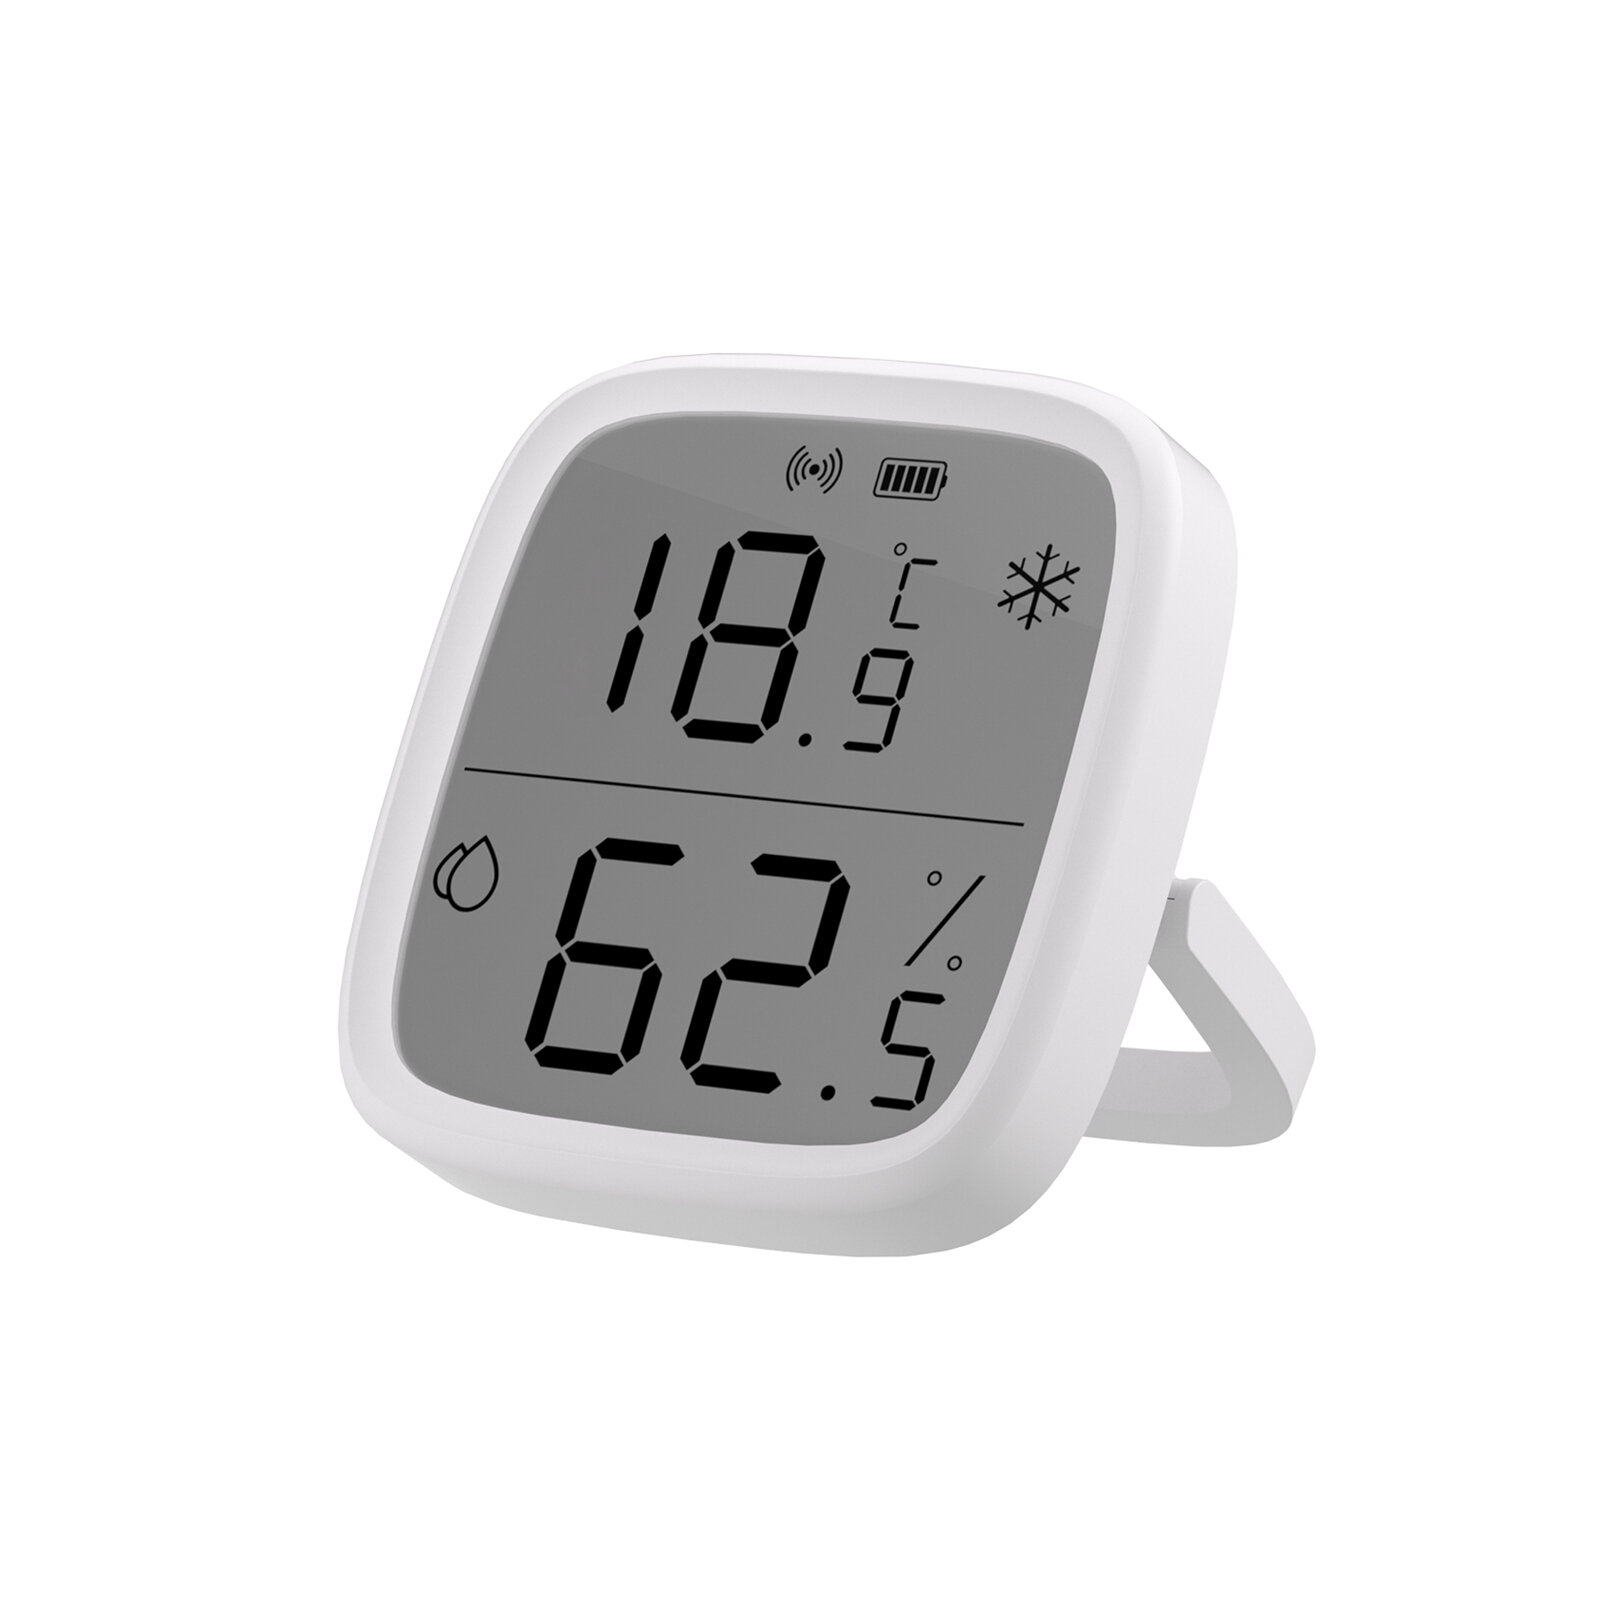 best price,sonoff,snzb,02d,lcd,smart,temperature,humidity,sensor,coupon,price,discount